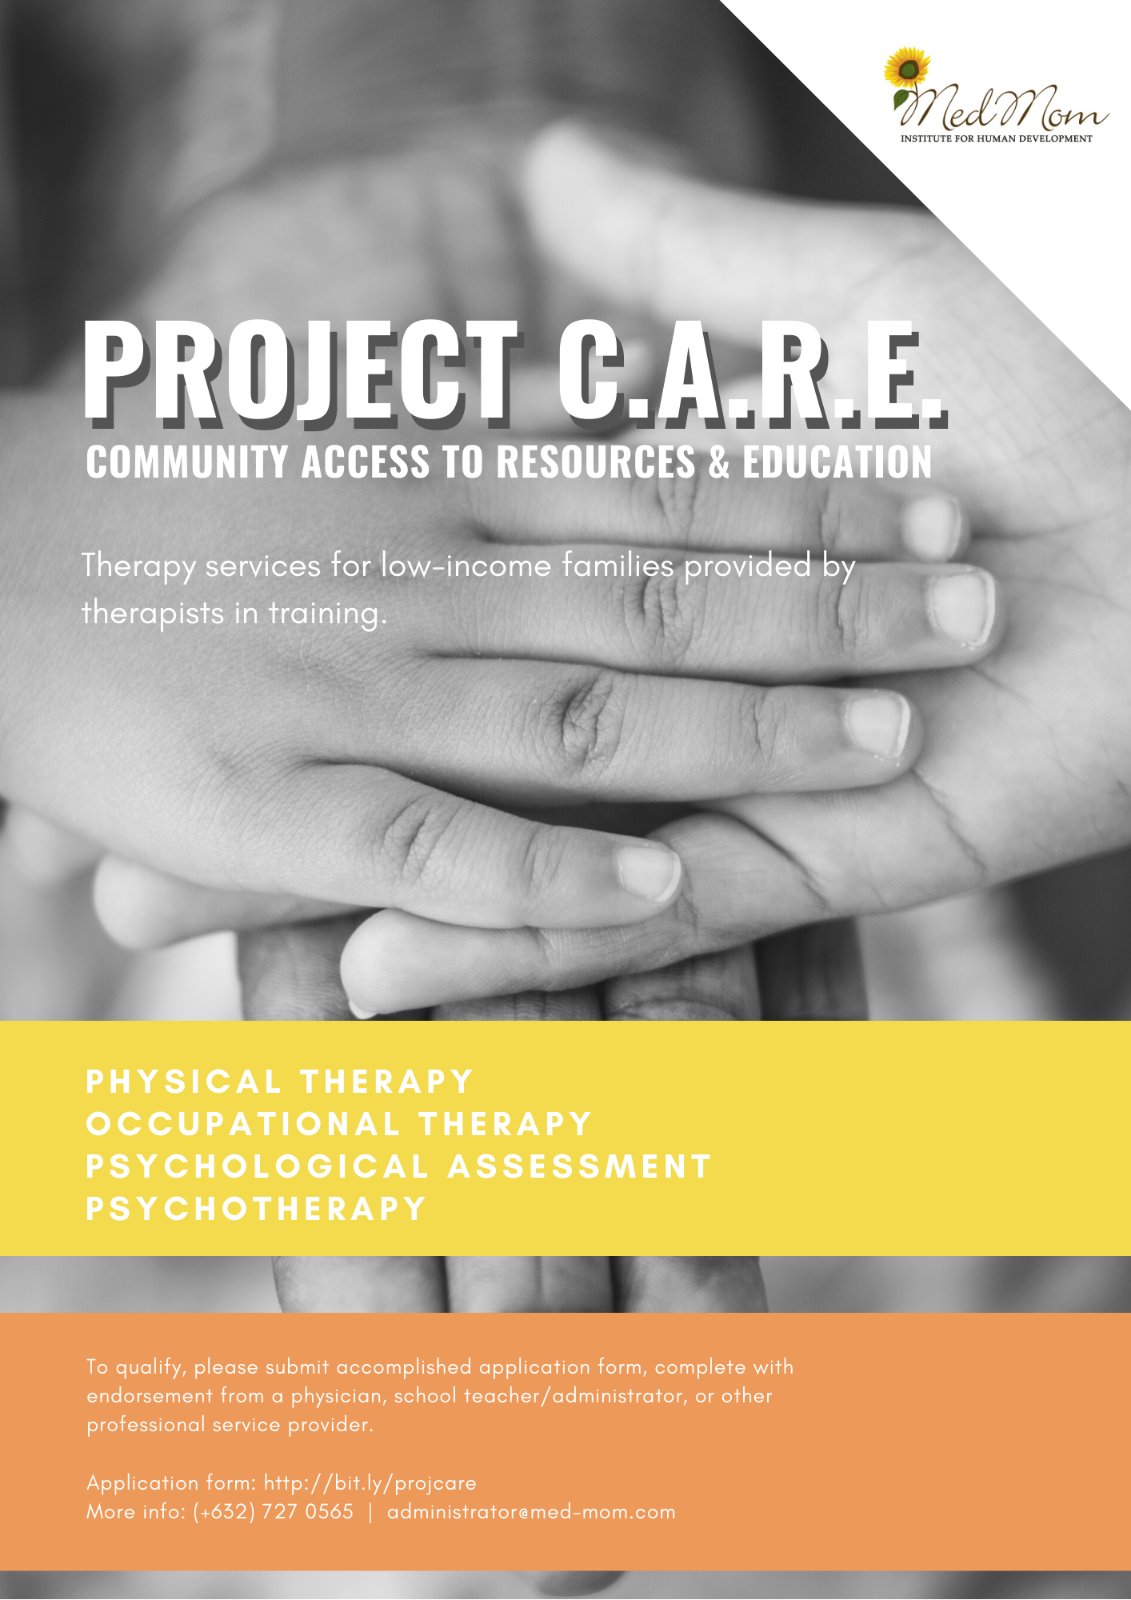 Project CARE